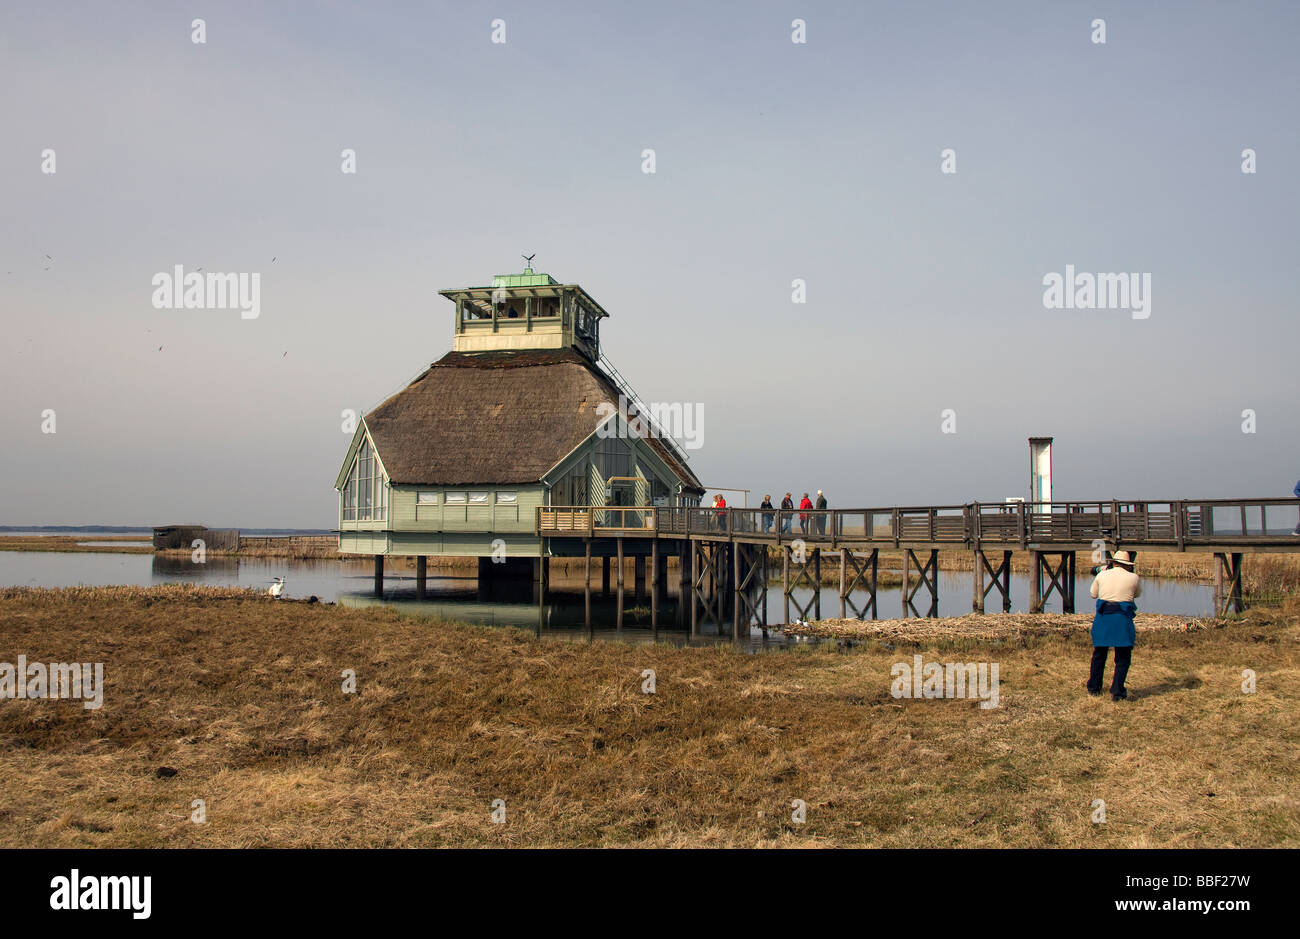 The visitor's centre, Hornborga Naturum, and boardwalk leading to it. Stock Photo